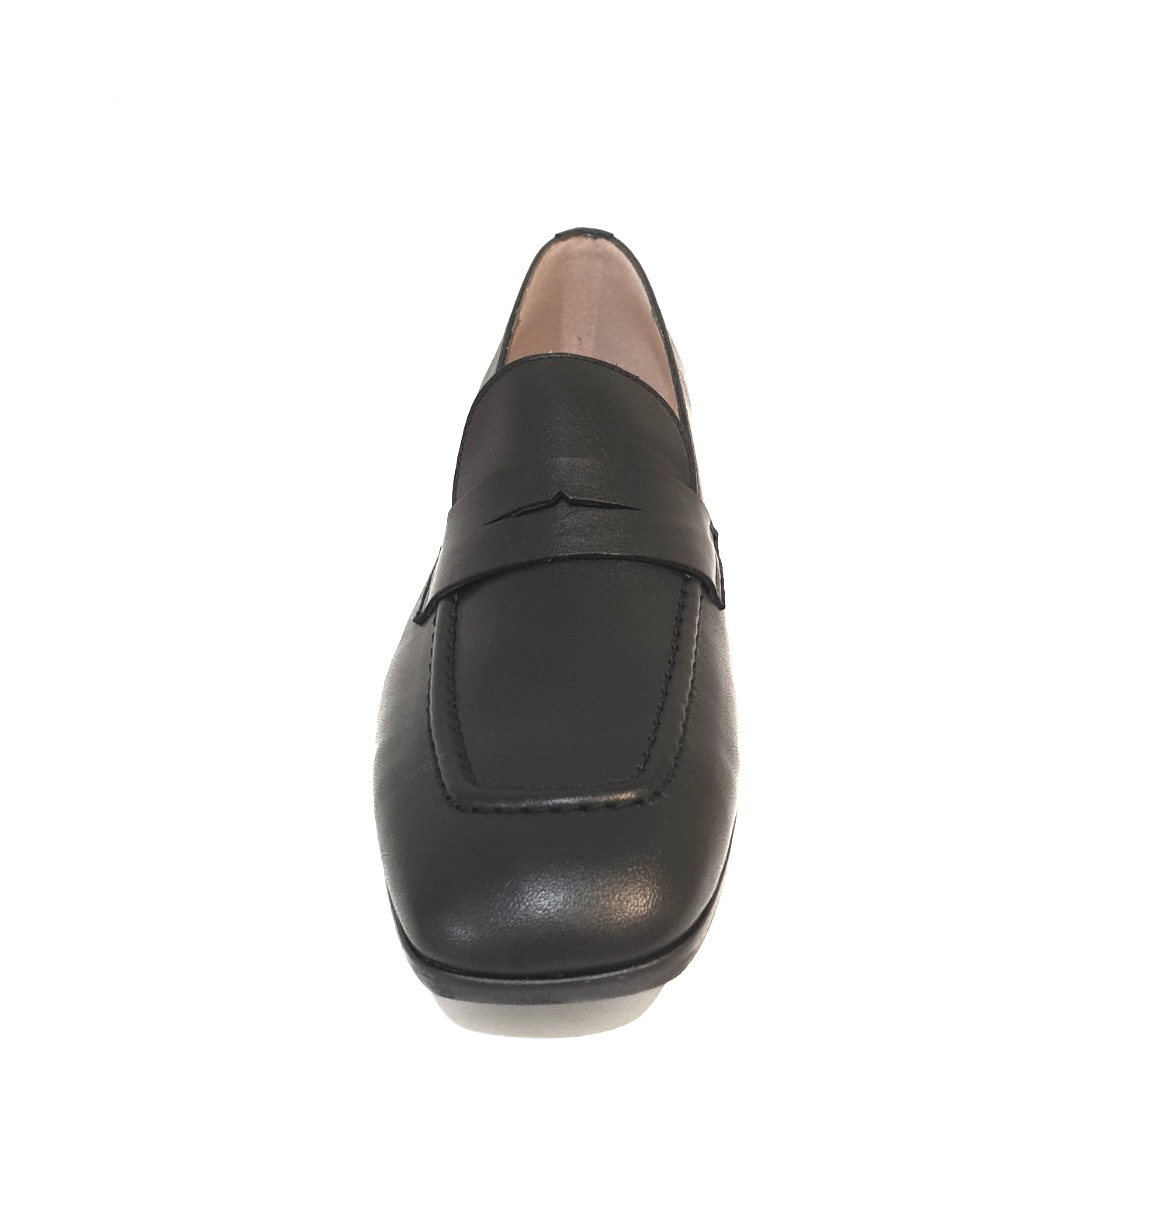 Wonders C-7105 Iseo V Negro Black Leather Loafer Made In Spain